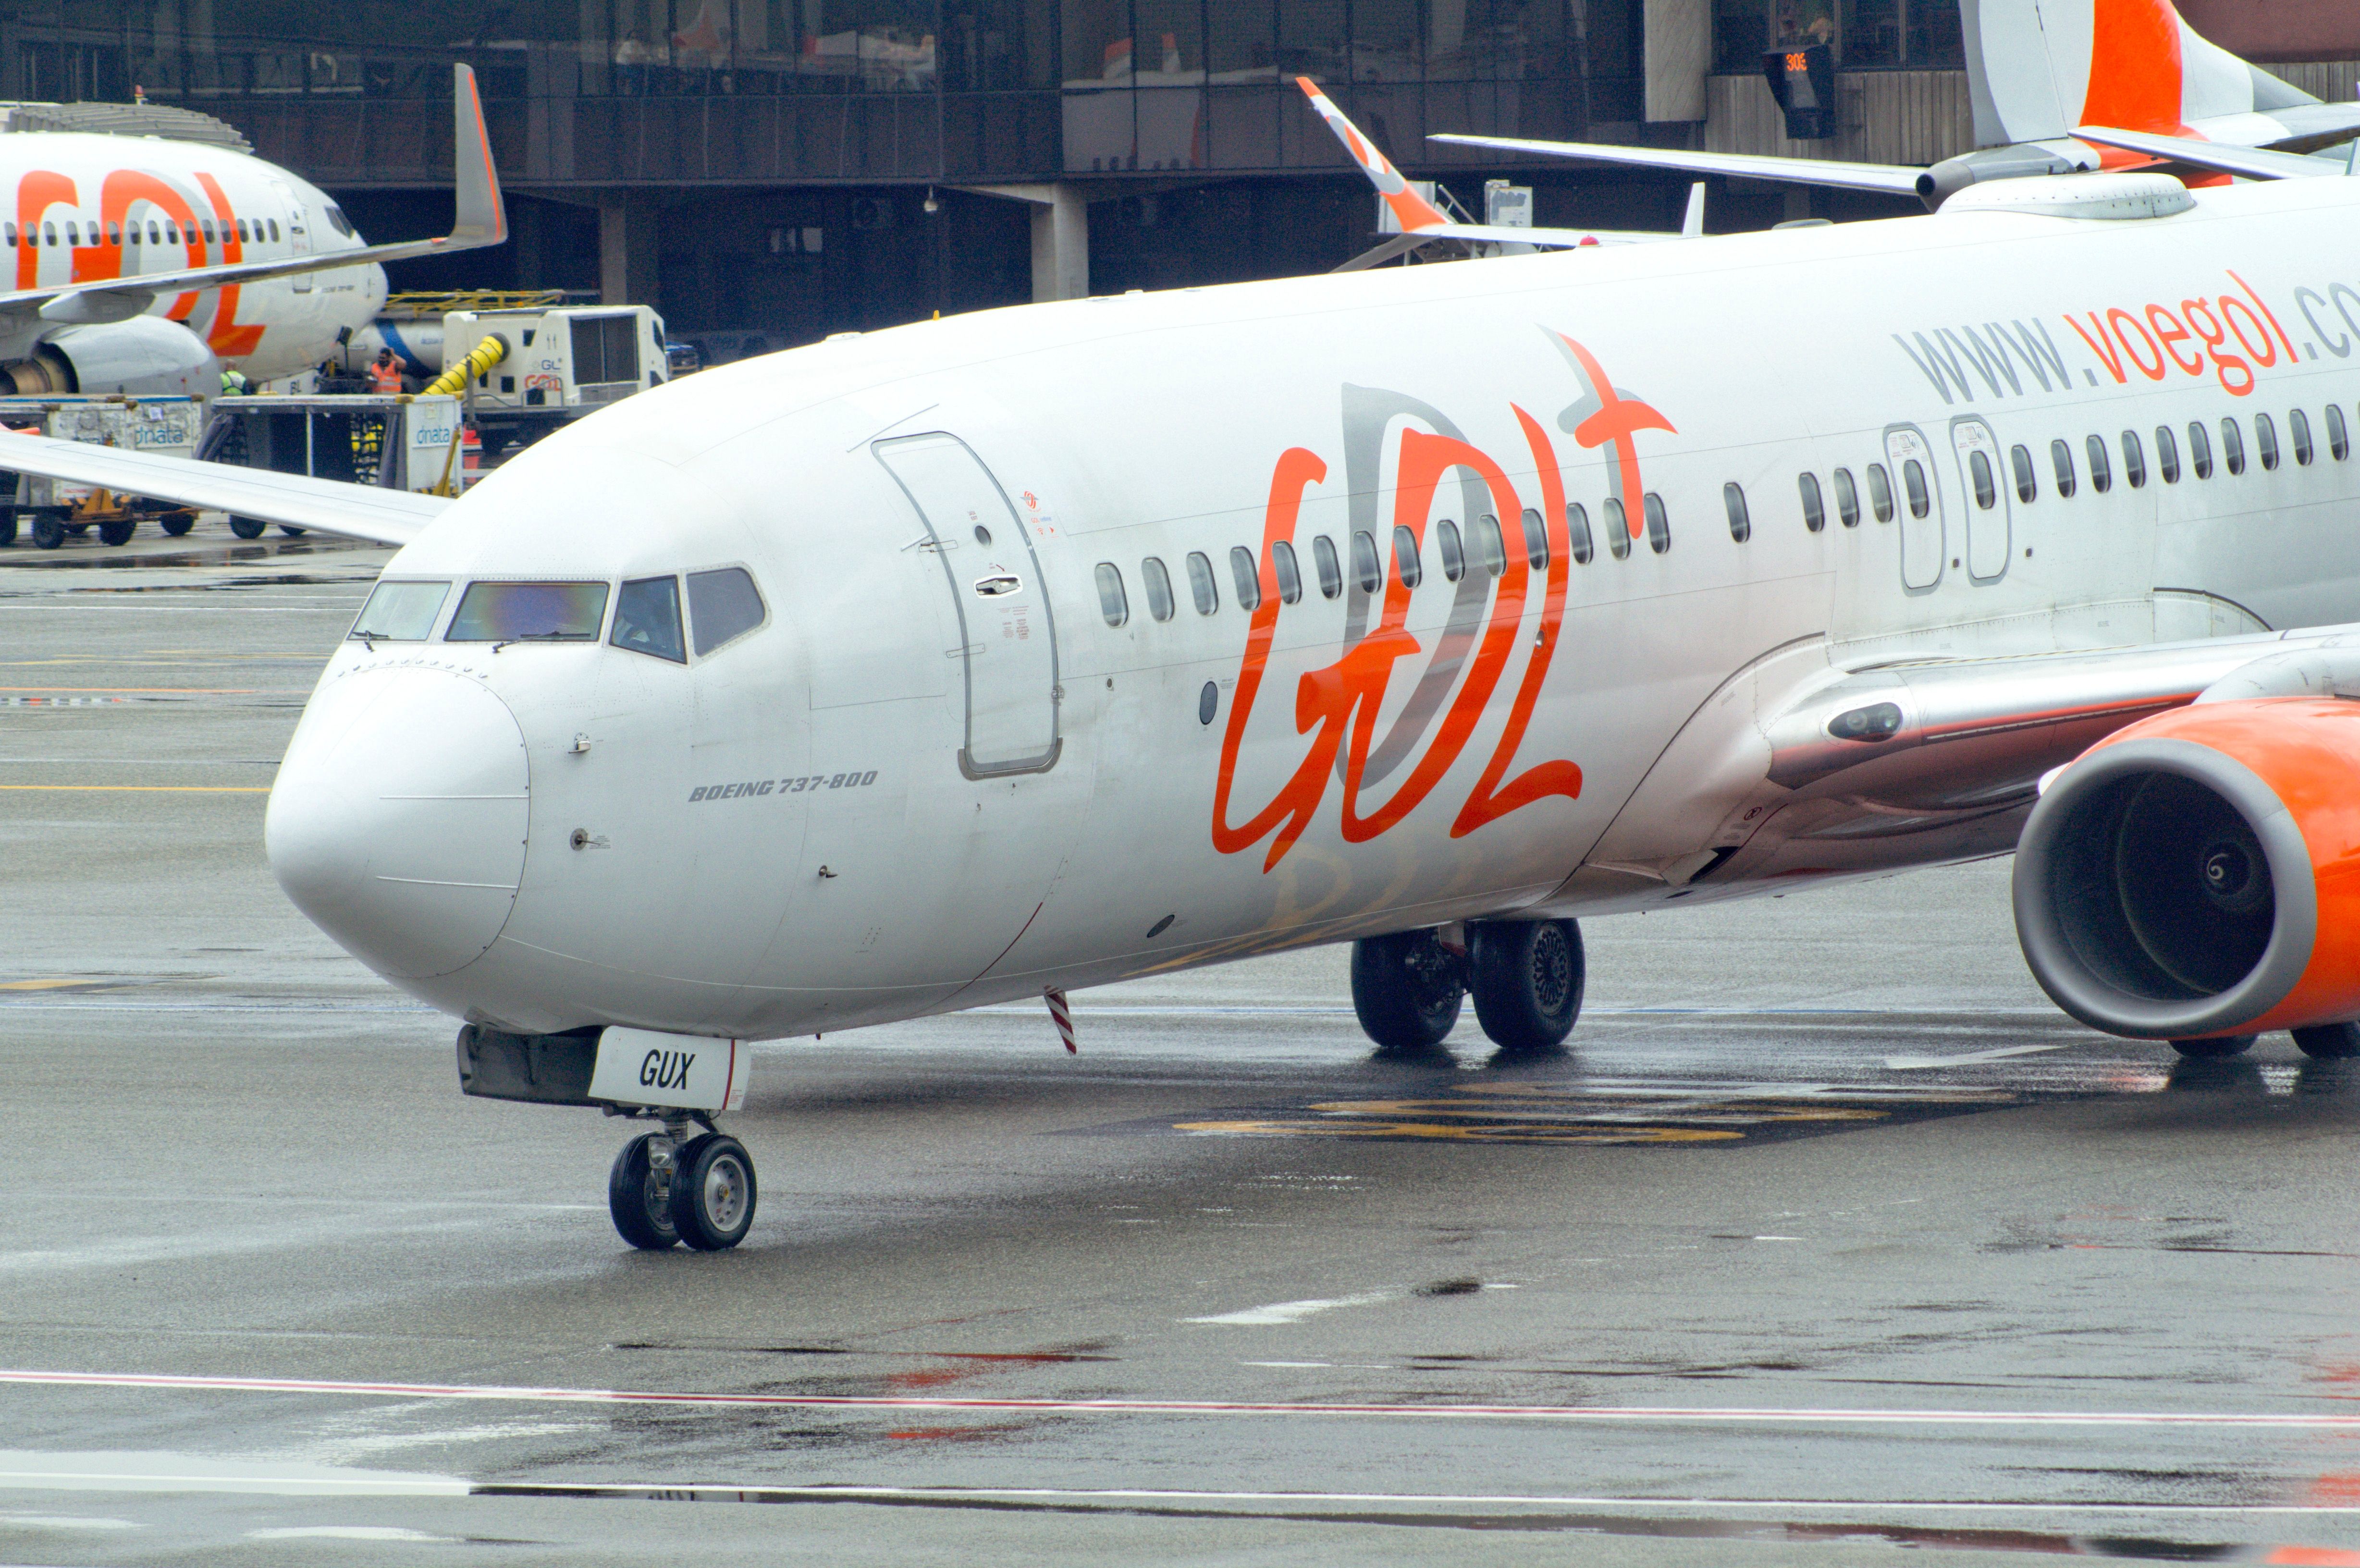 GOL Airlines Boeing 737-800 at gate